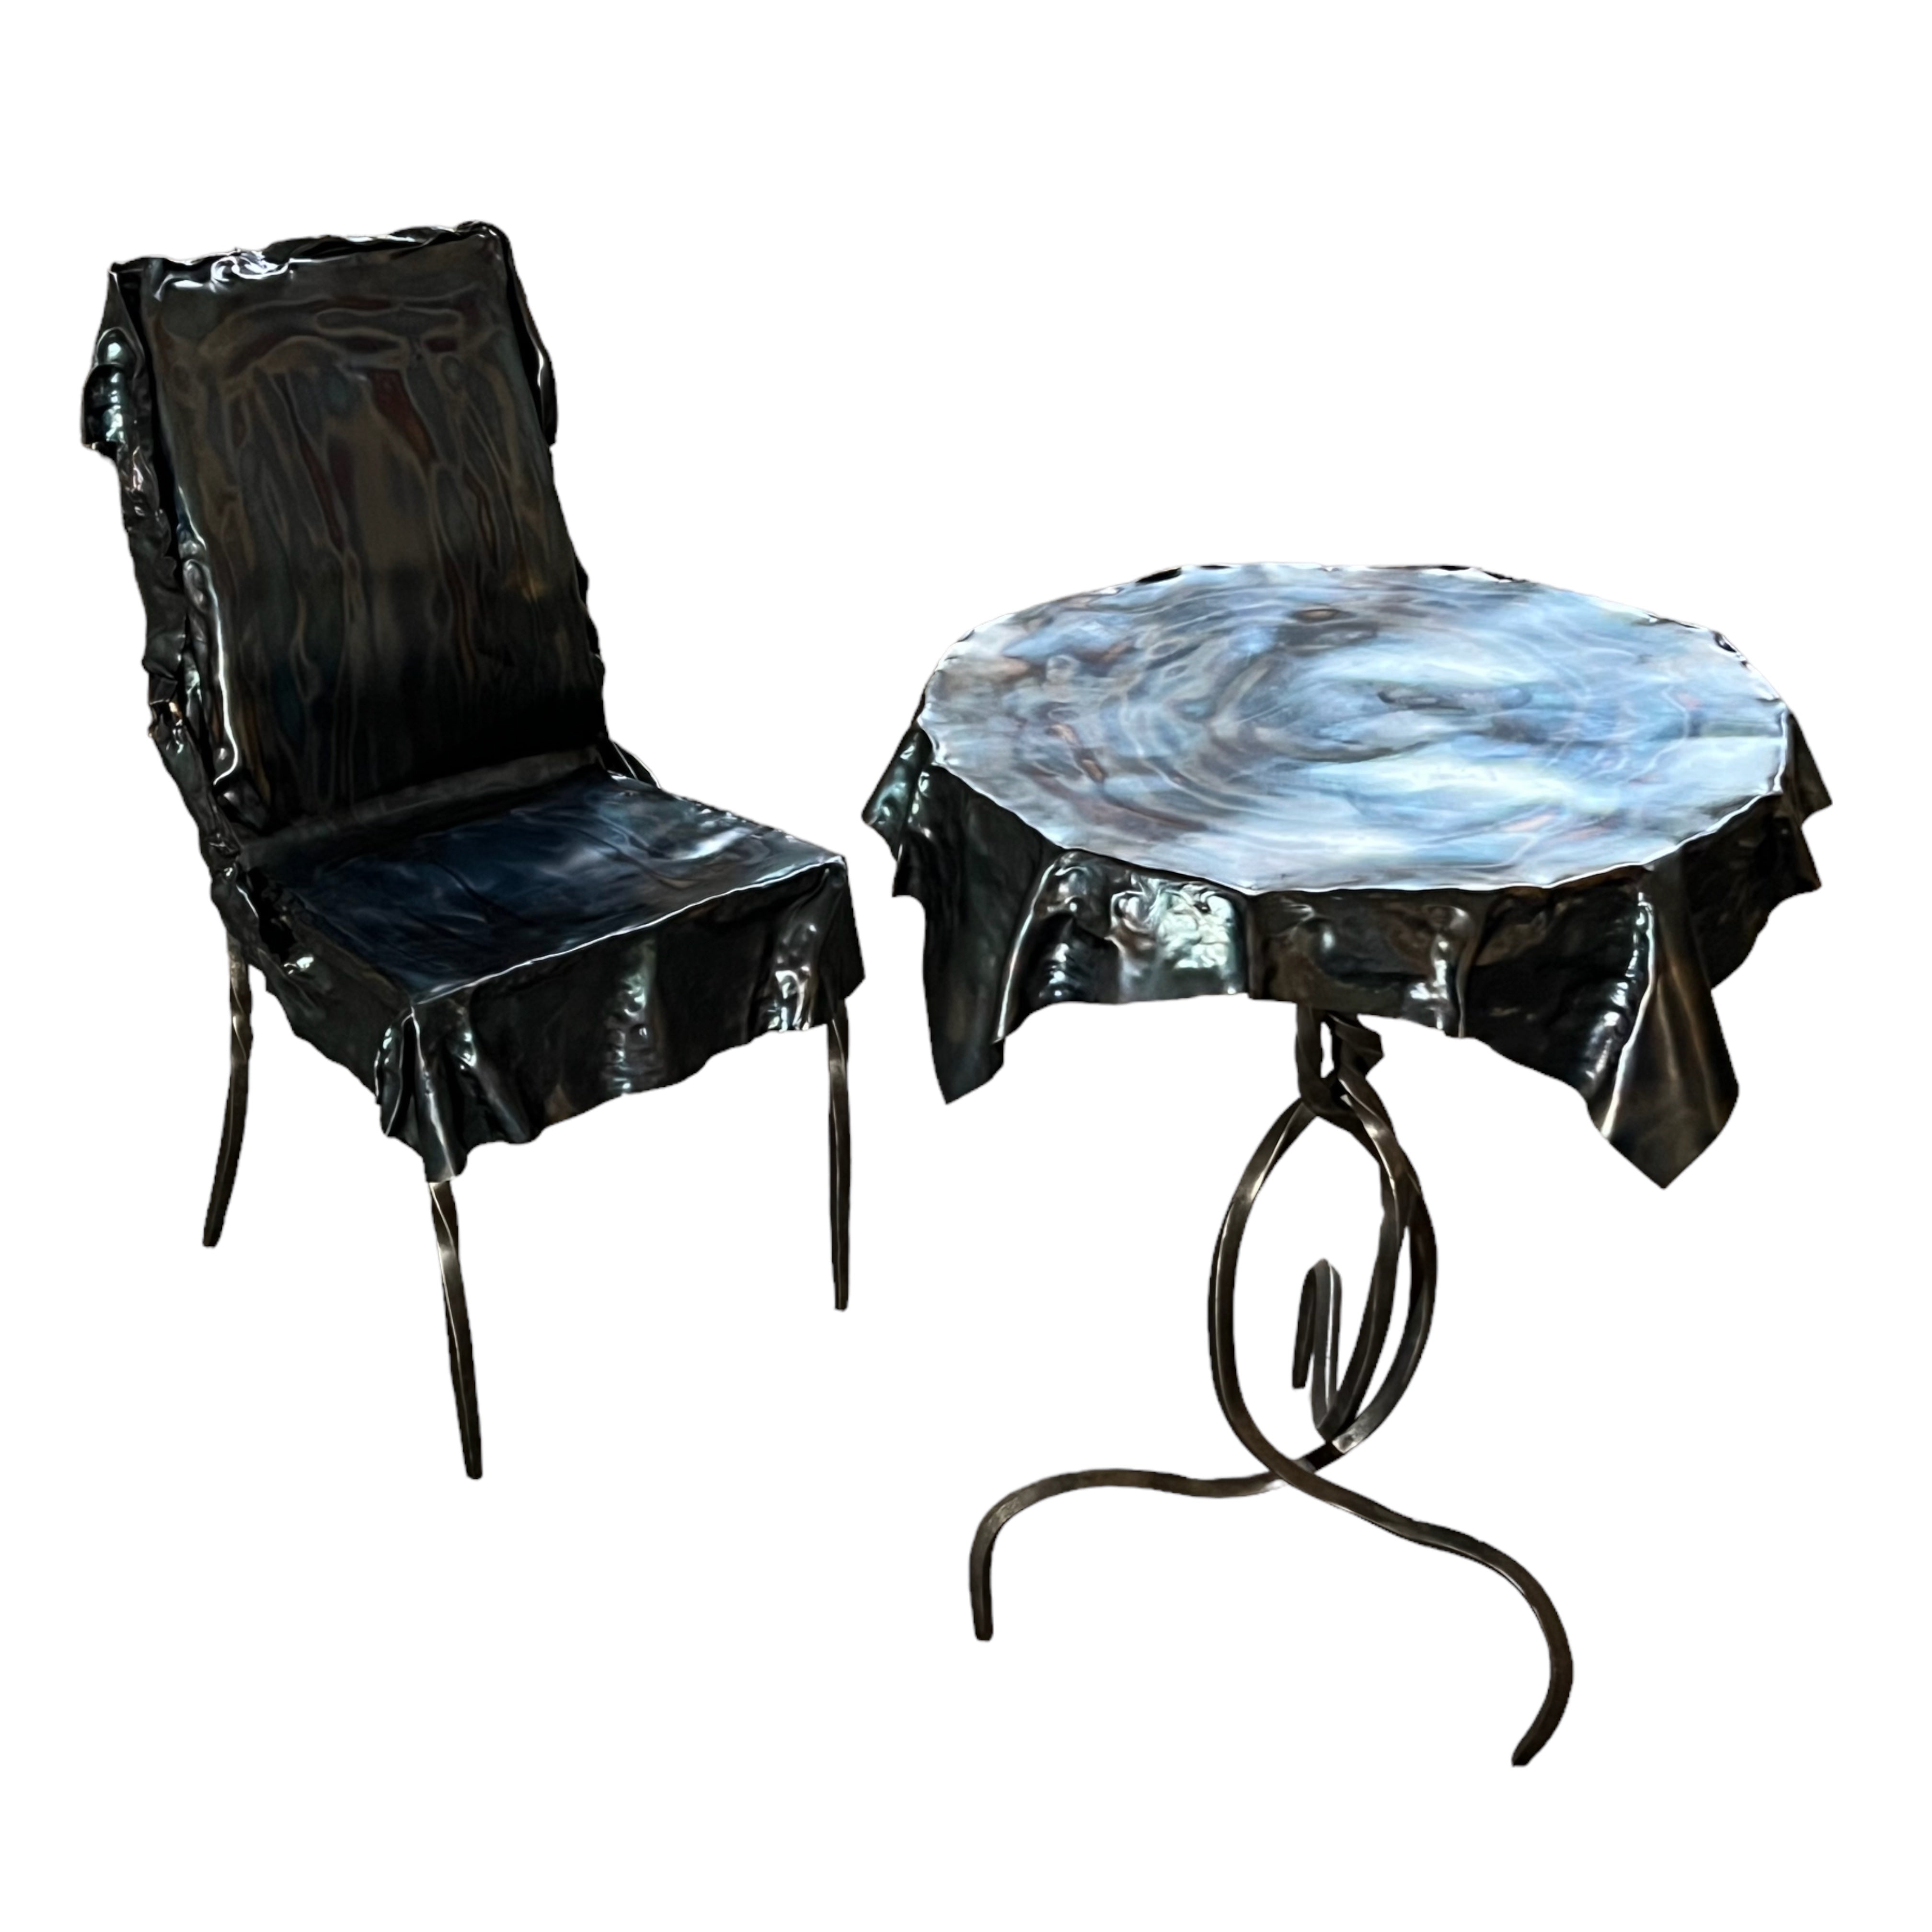 TROMPE L'OEIL TABLE AND CHAIR BY BARNABY LEWIS